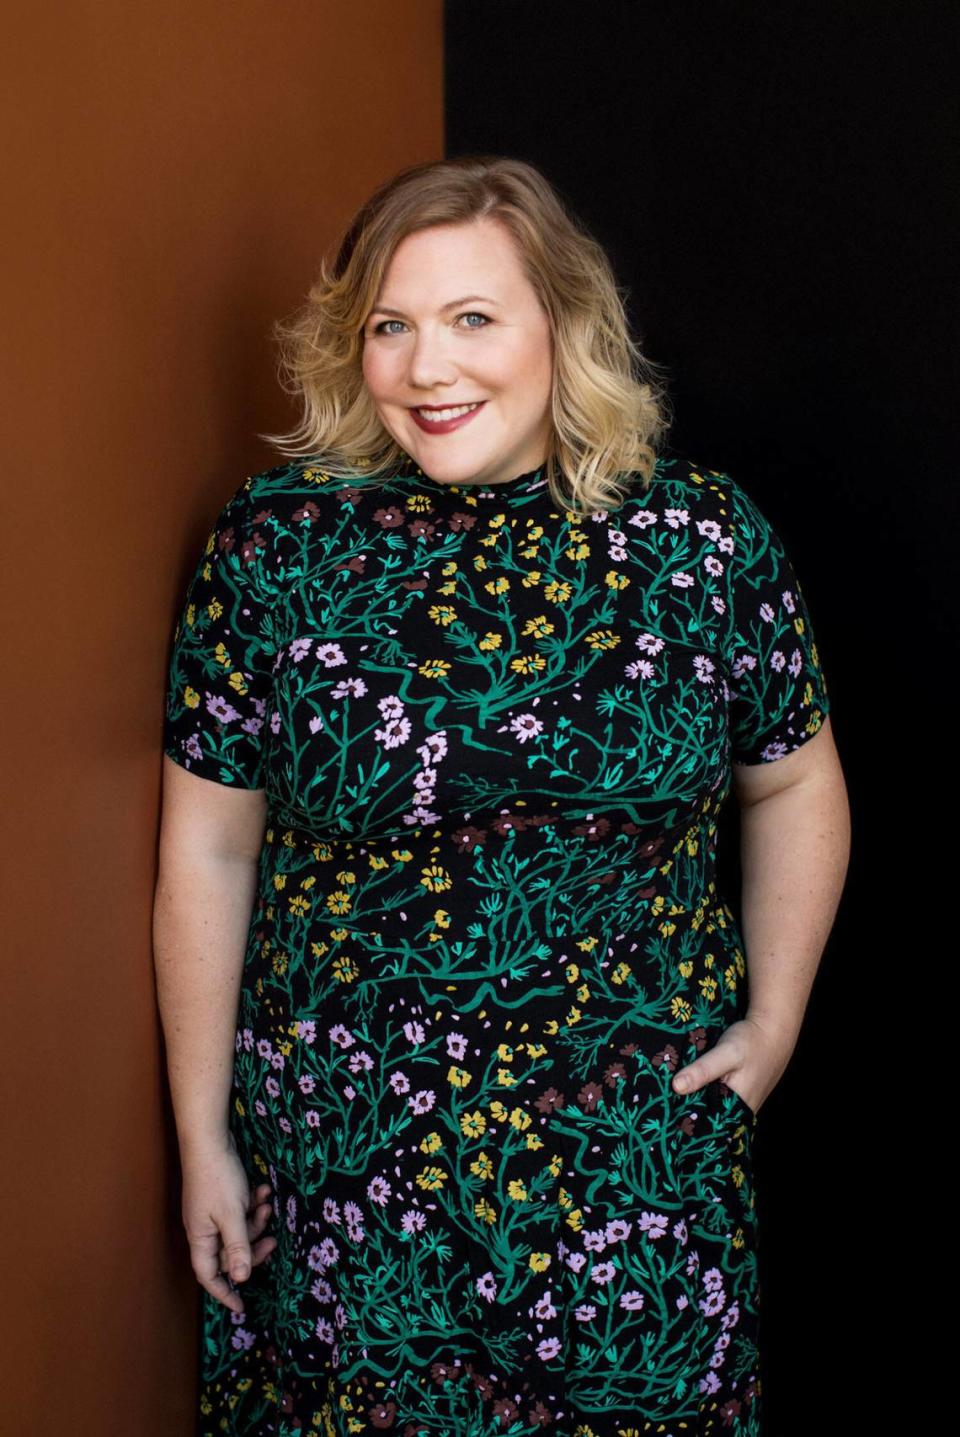 Speaker/activist/comedian Lindy West will talk about expectations and reality in “Every Castle, Ranked,” stopping in Olympia on Sept. 23.